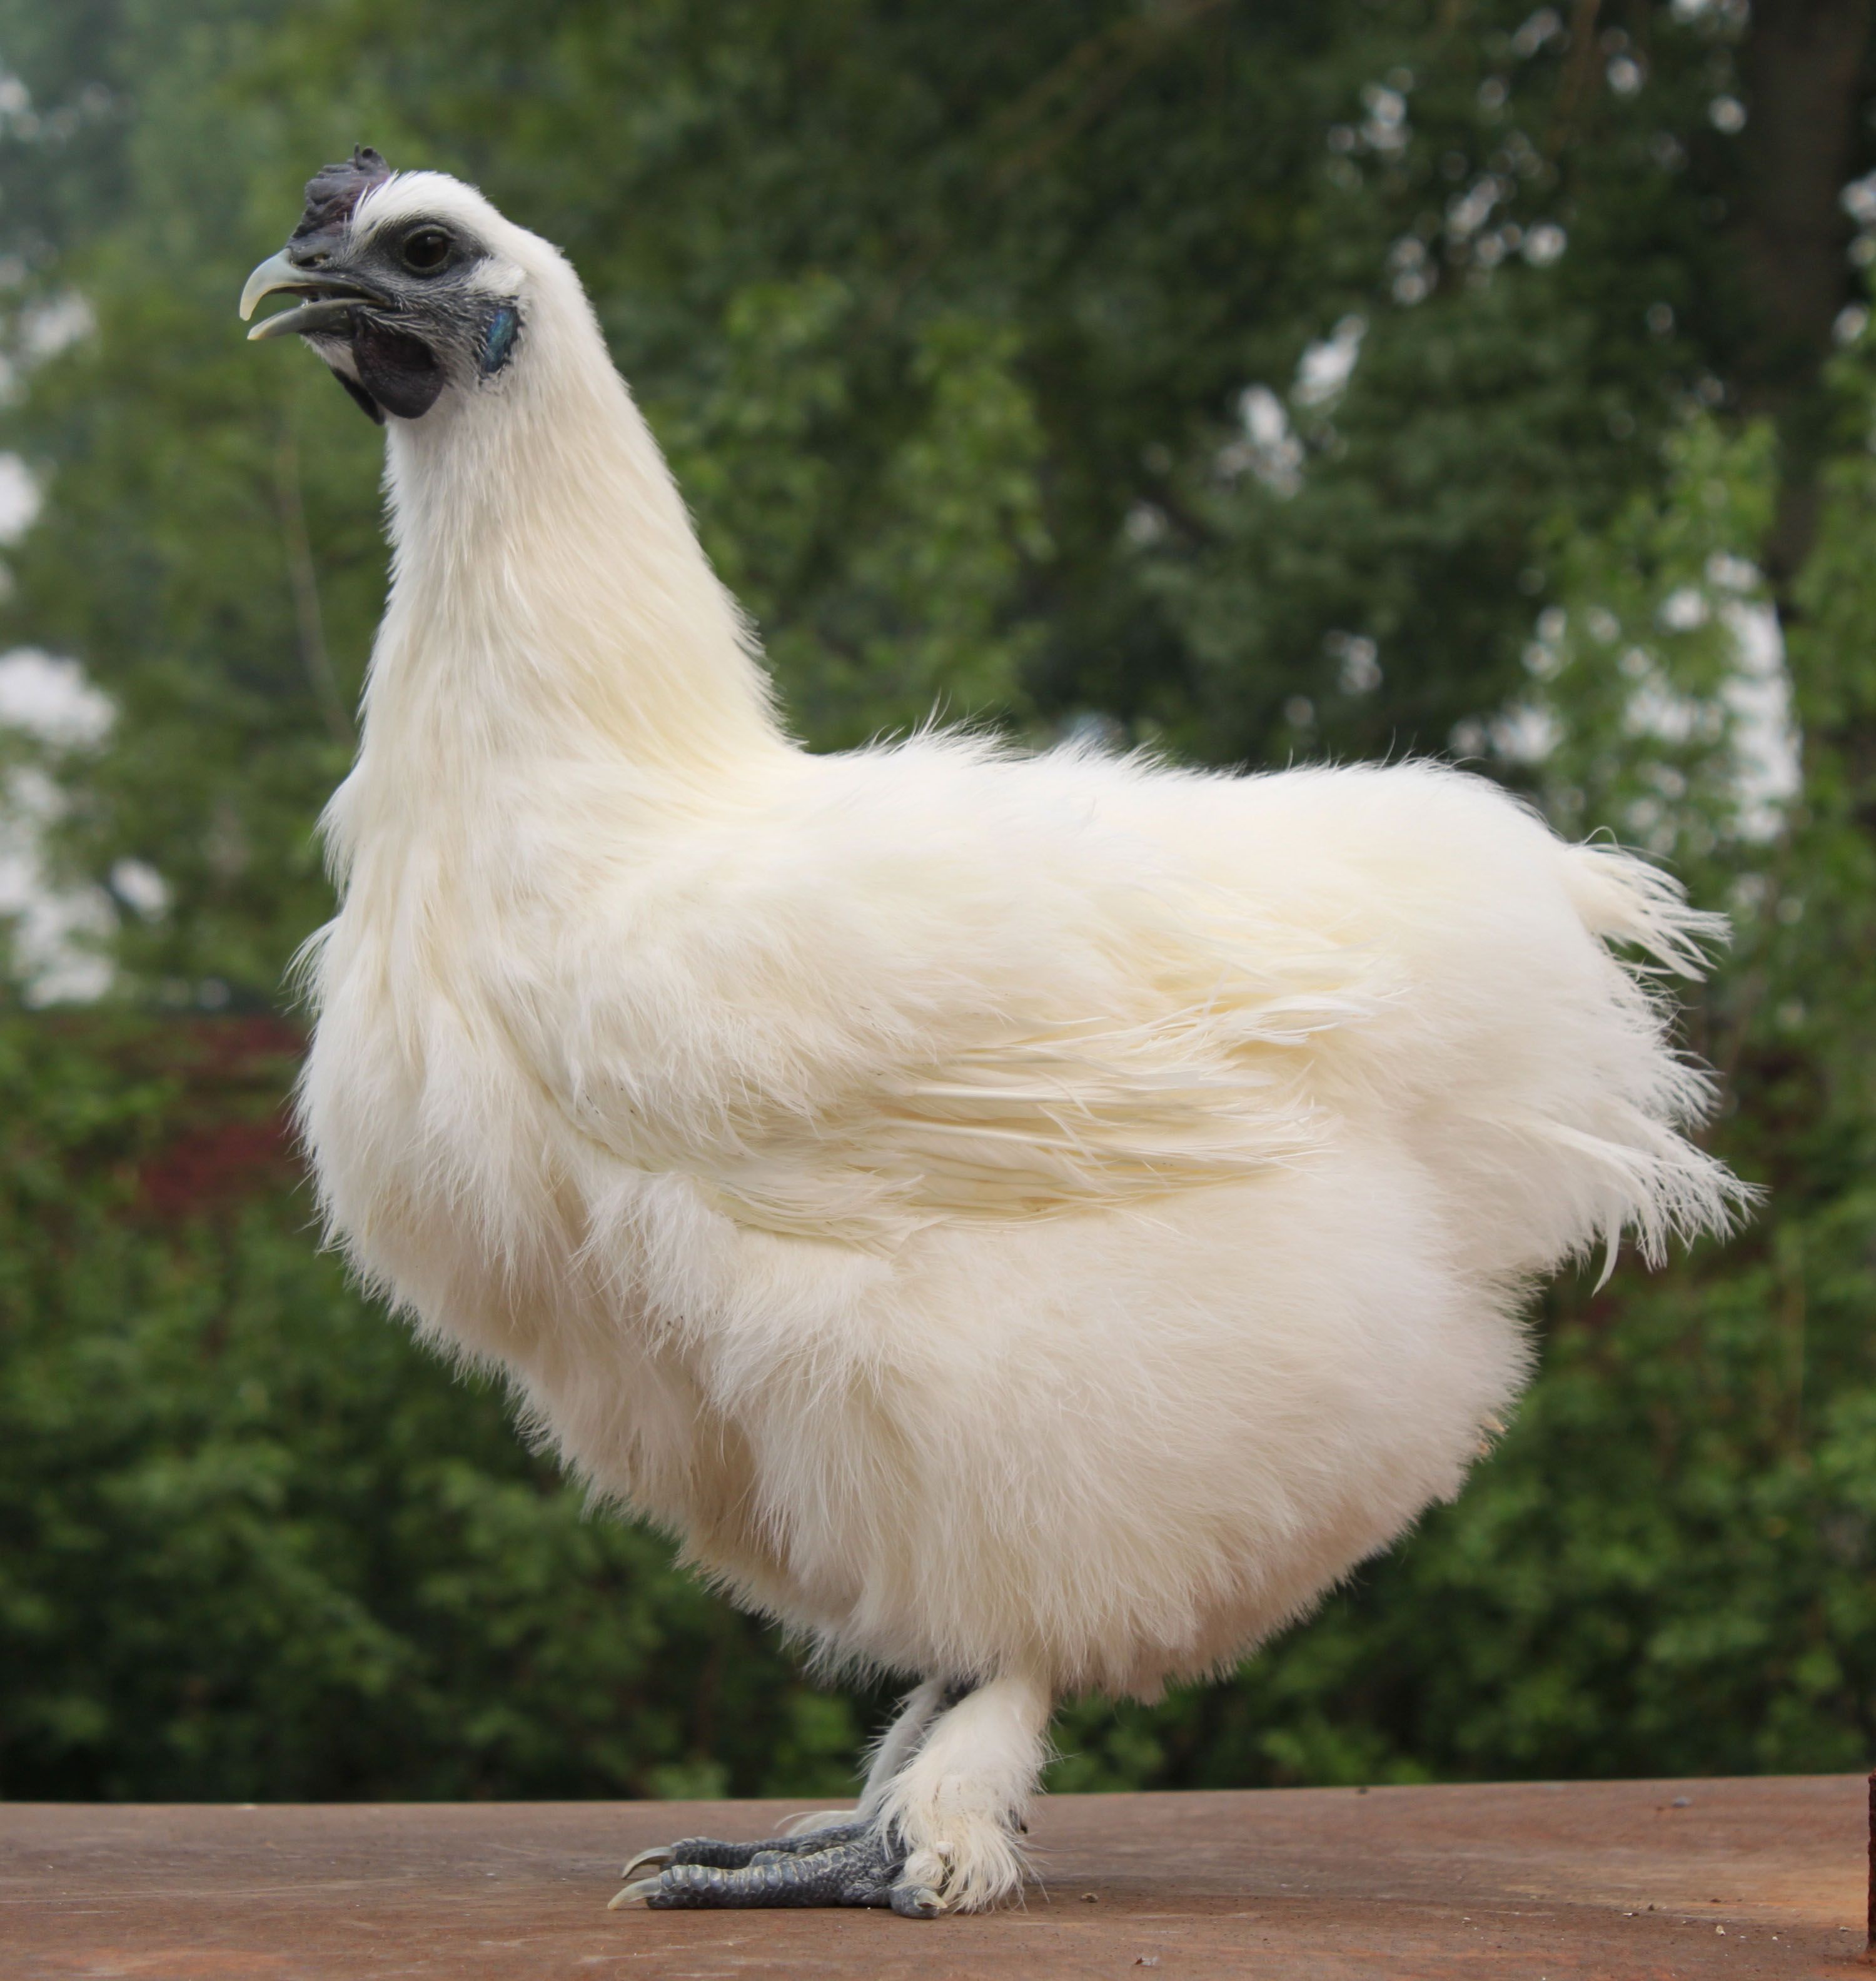 A cis-Regulatory Mutation of PDSS2 Causes Silky-Feather in Chickens ...